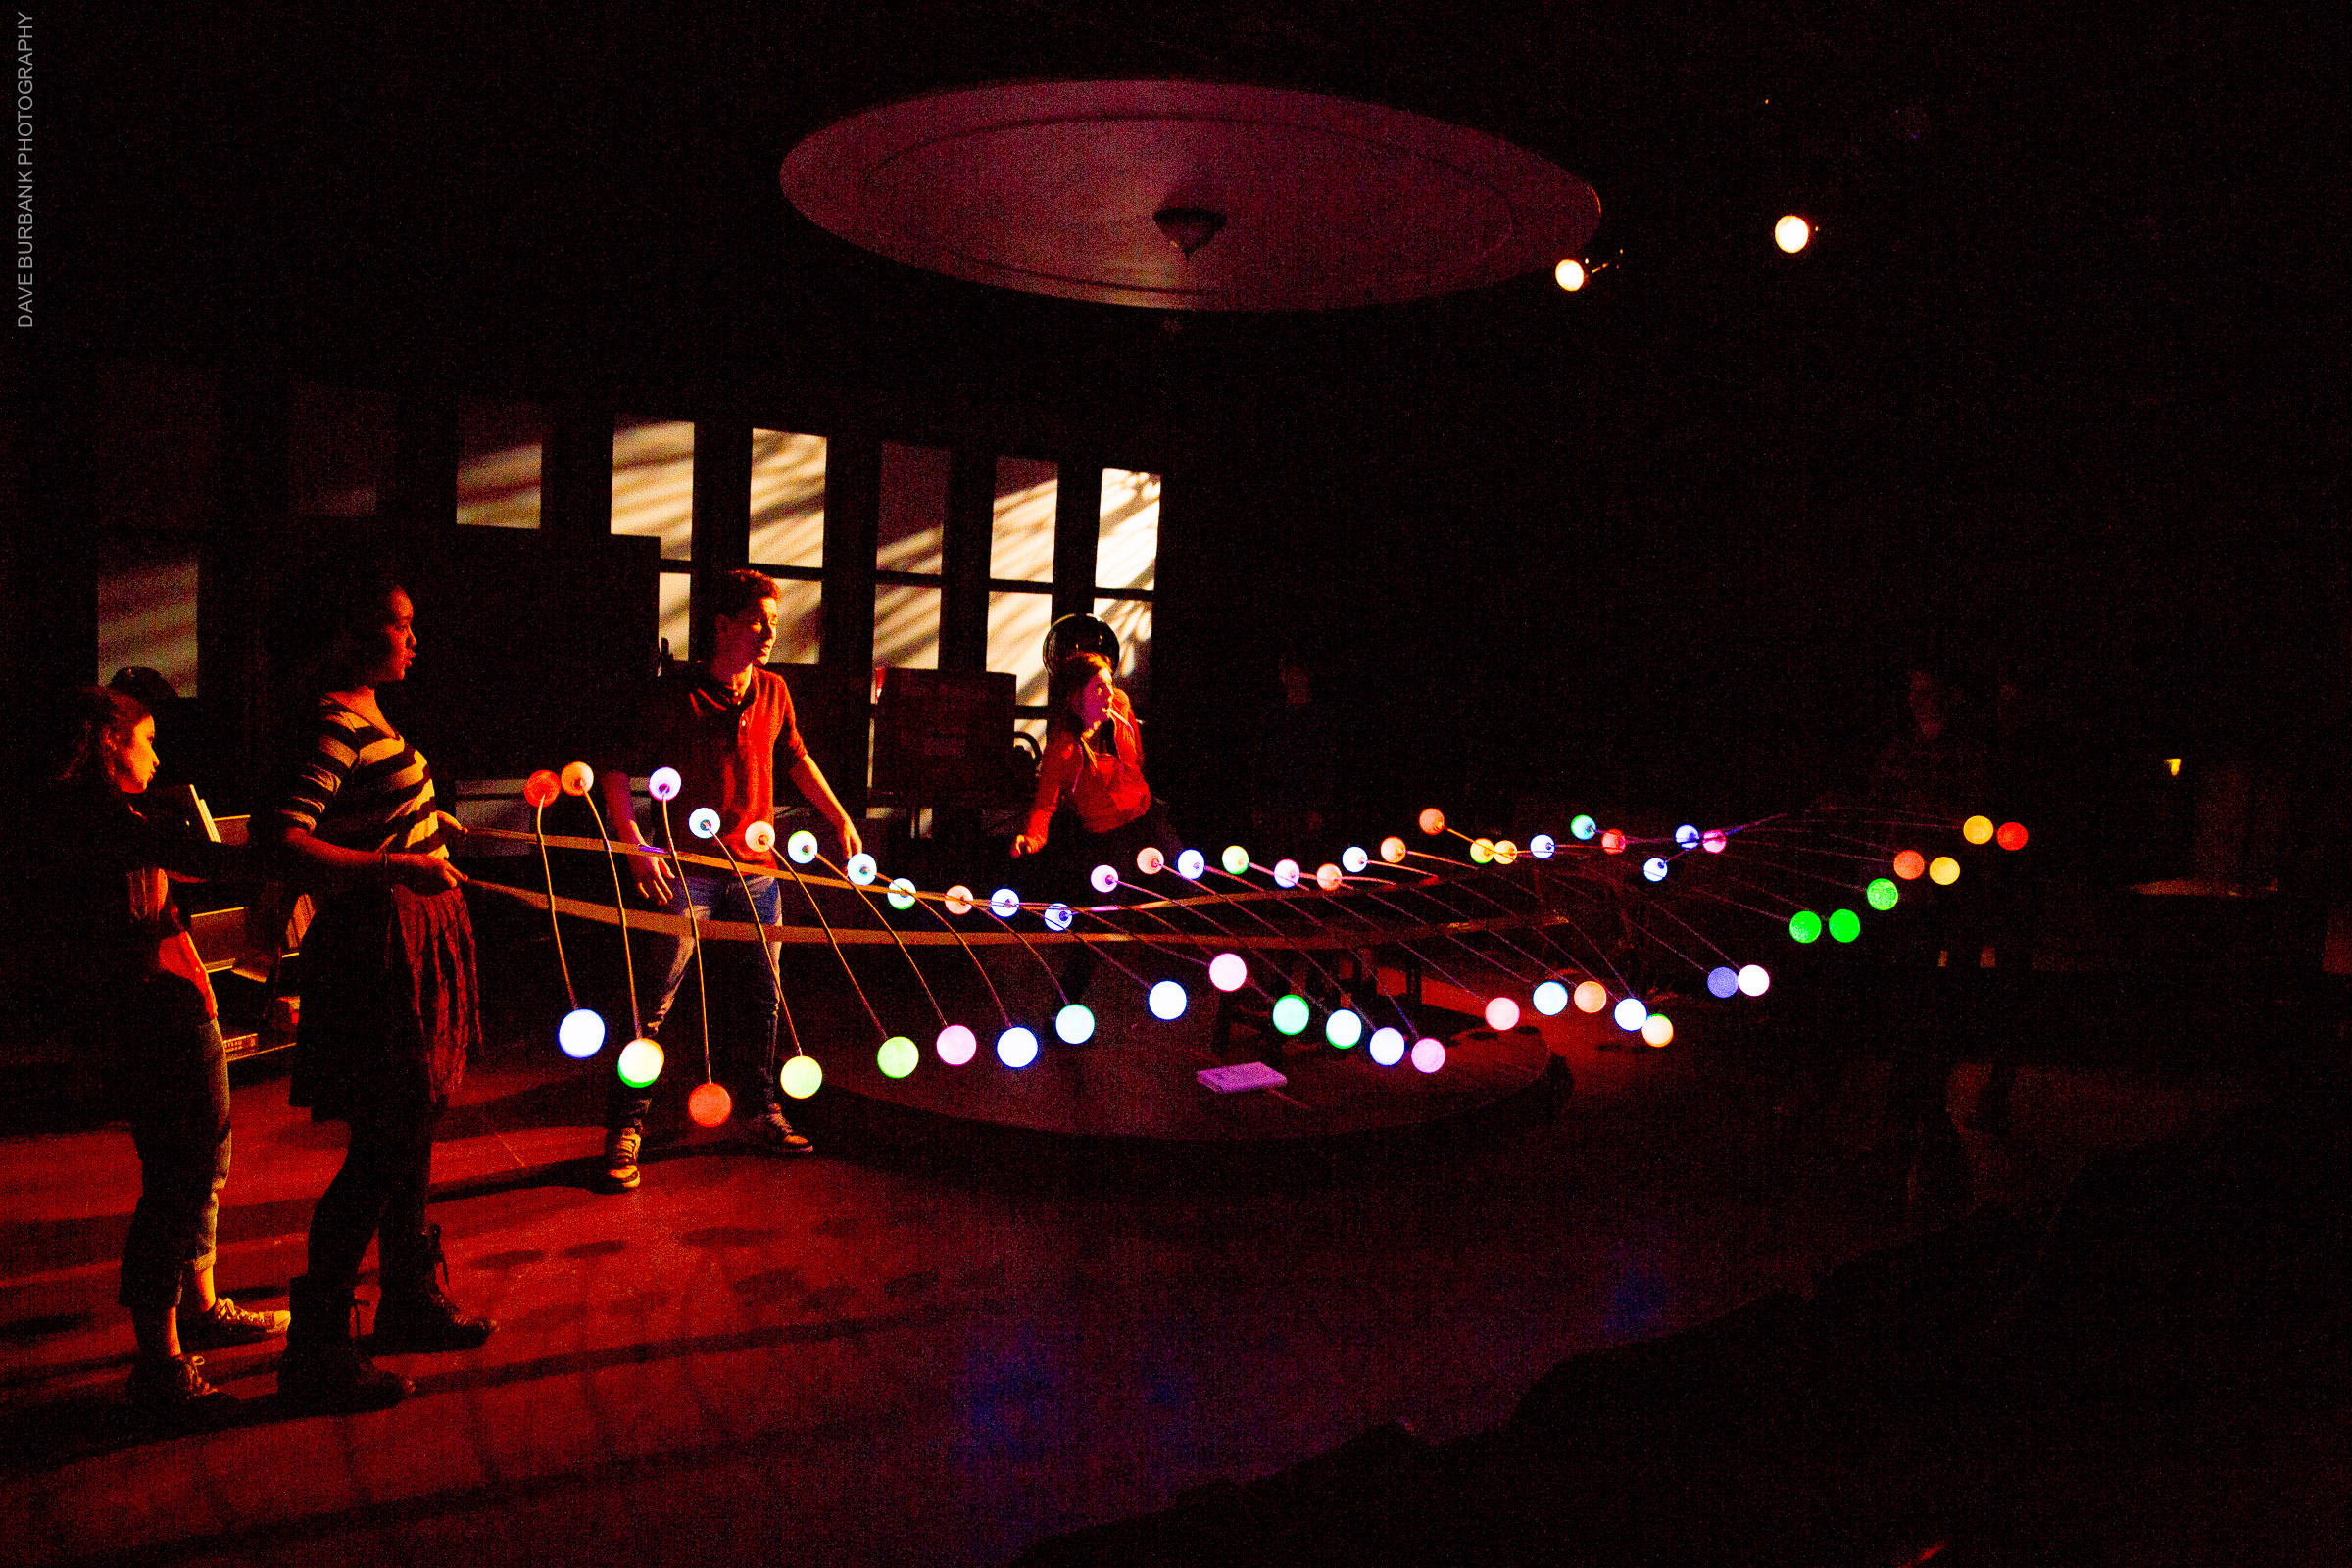    Physics Fair  by Rachel Lampert and Lesley Greene Kitchen Theatre Company   Musical direction by Patrick Young Scenic and lighting design by Tyler M. Perry Photos by George Cannon 